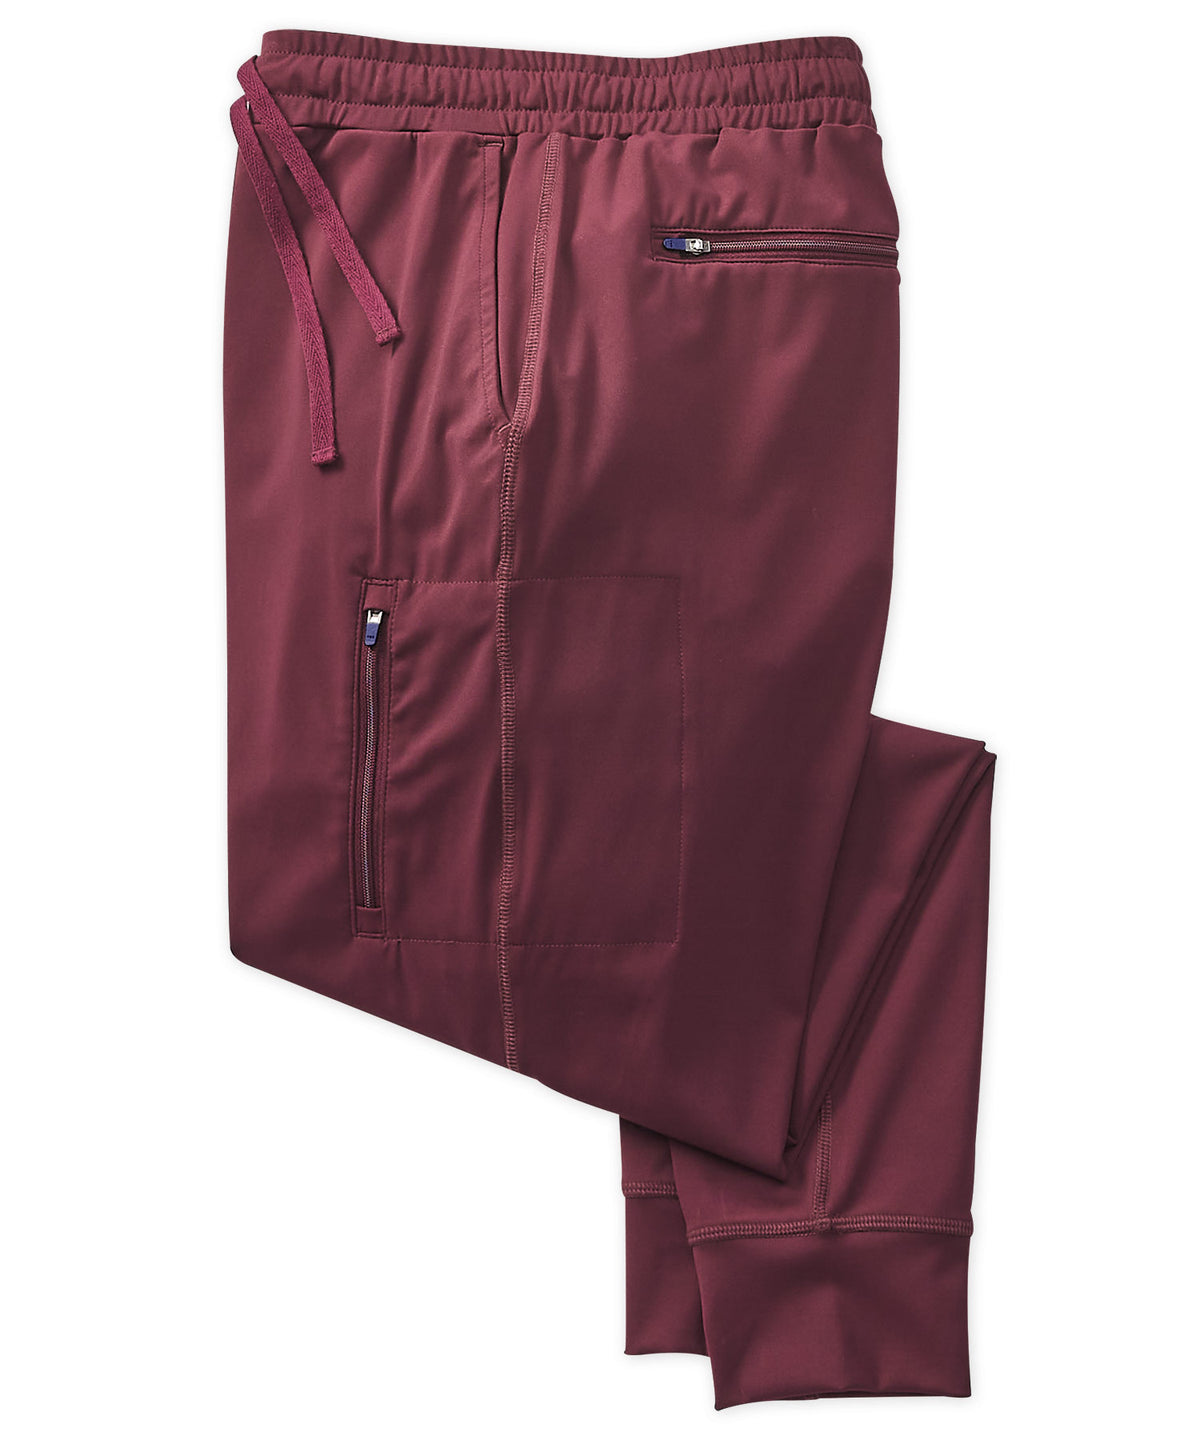 Westport Lifestyle All Day Performance Jogger, Big & Tall